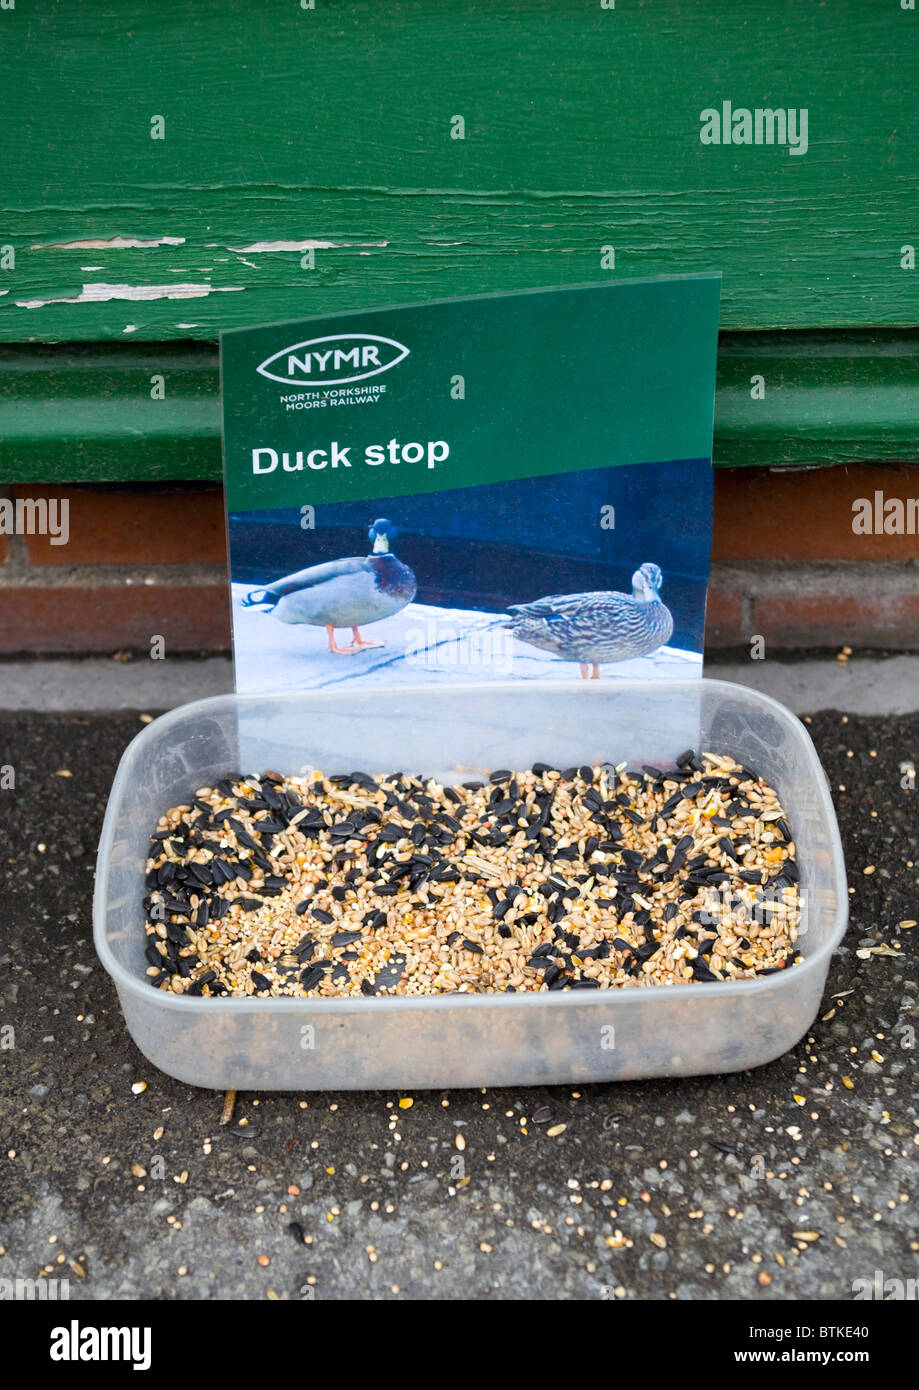 Duck Stop Food at Pickering Train Station North Yorkshire England UK Stock Photo